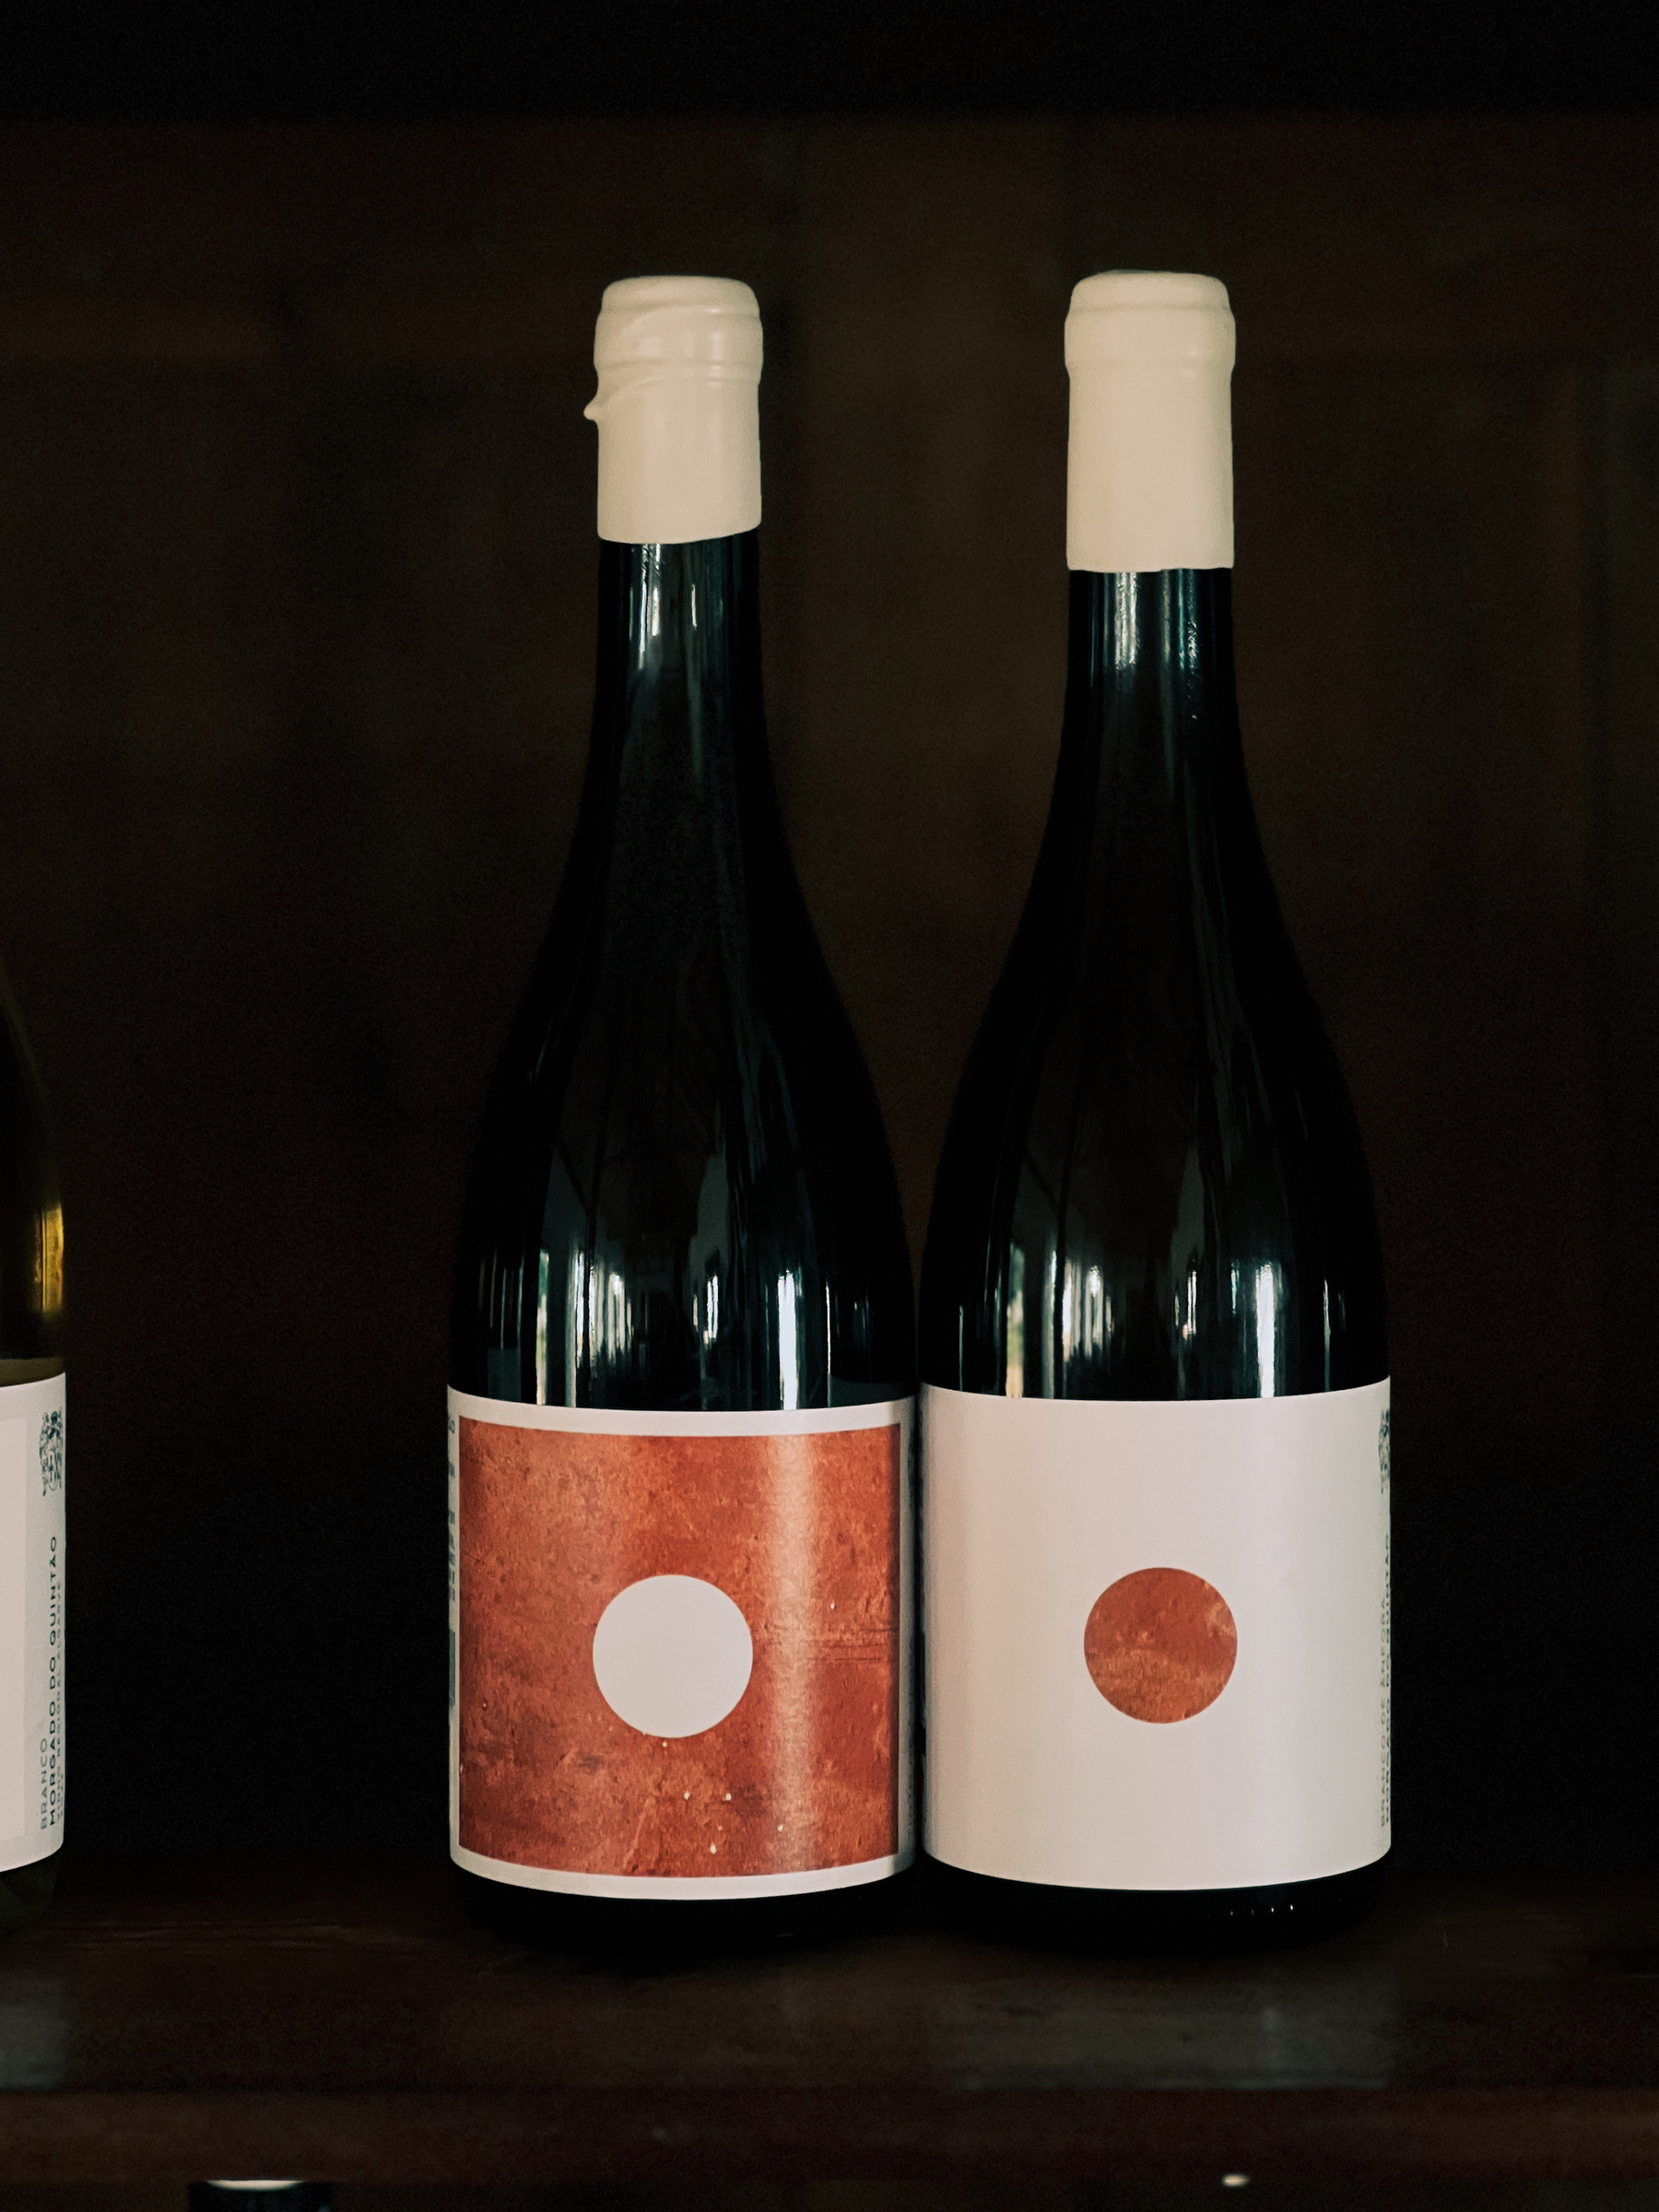 Two wine bottles with minimalist labels featuring a circular motif, placed on a wooden shelf.